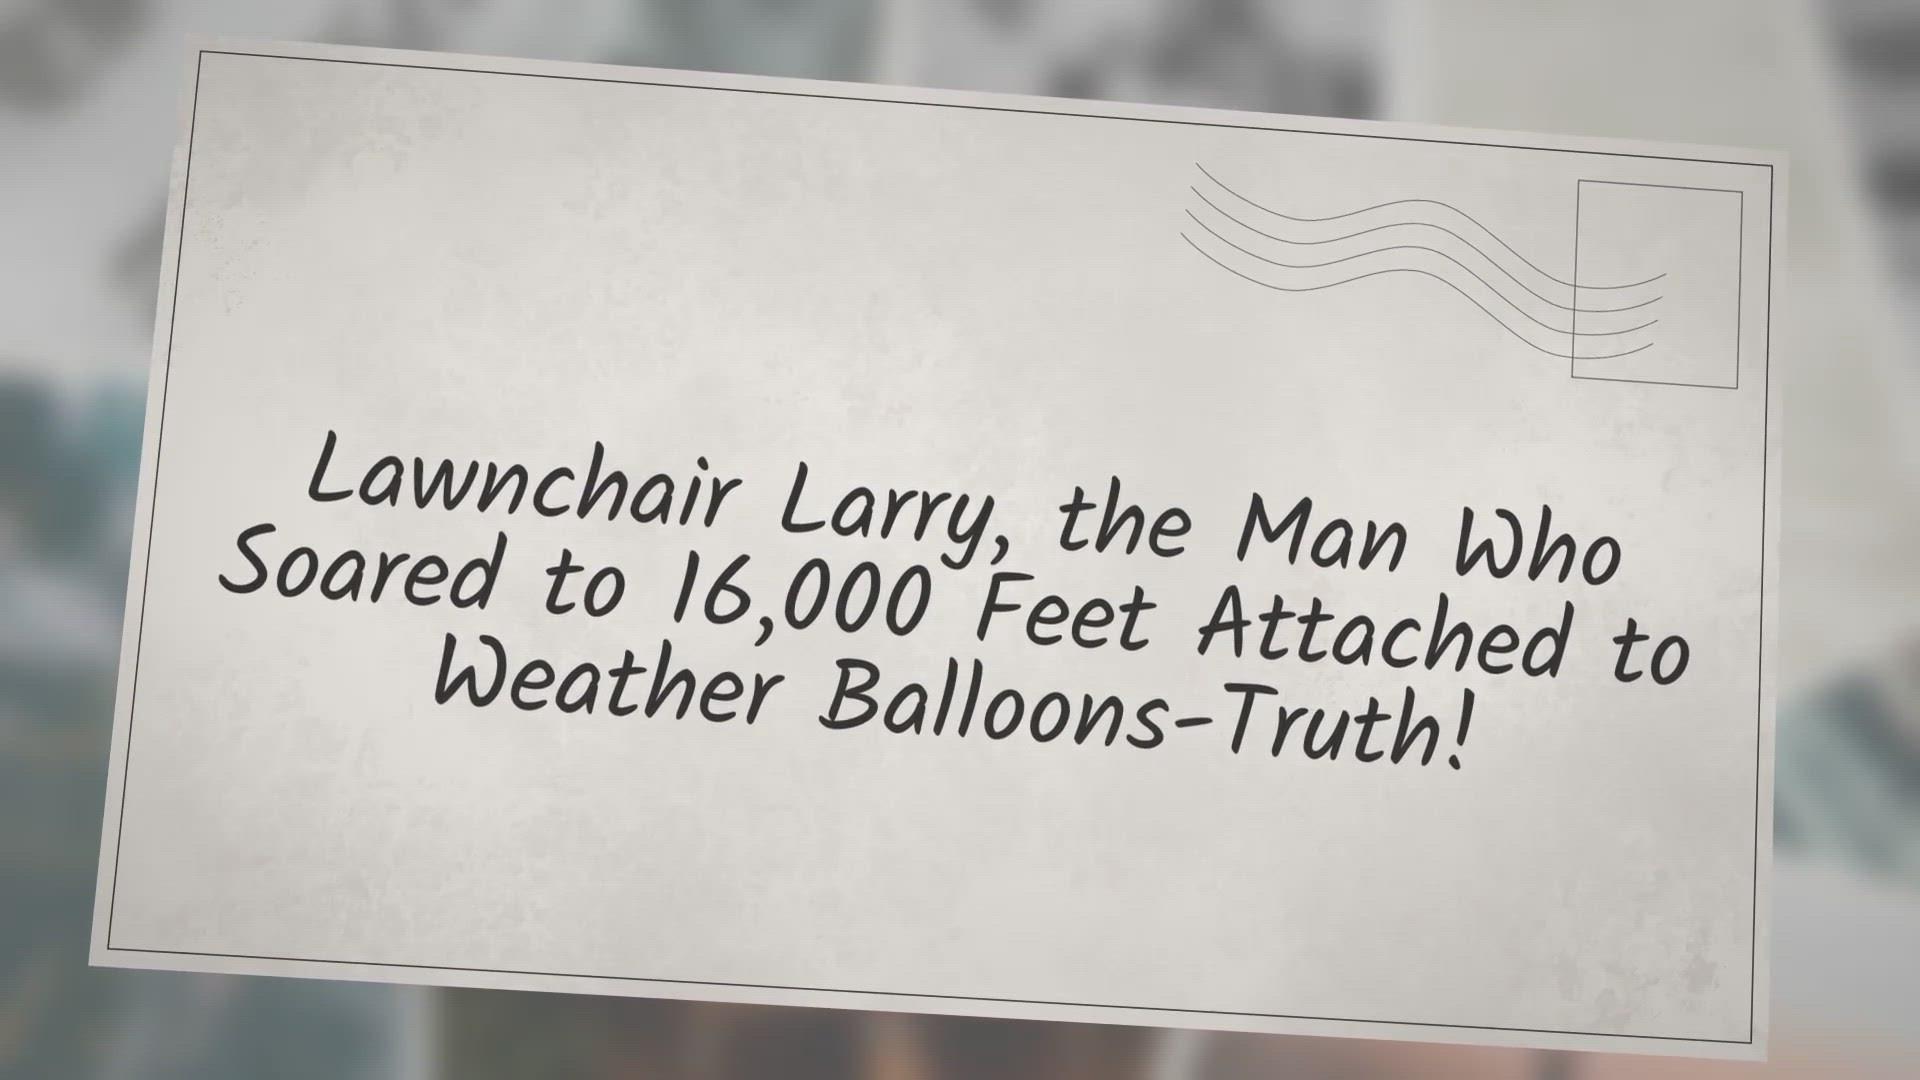 'Video thumbnail for Lawnchair Larry, the Man Who Soared to 16,000 Feet Attached to Weather Balloons-Truth!'